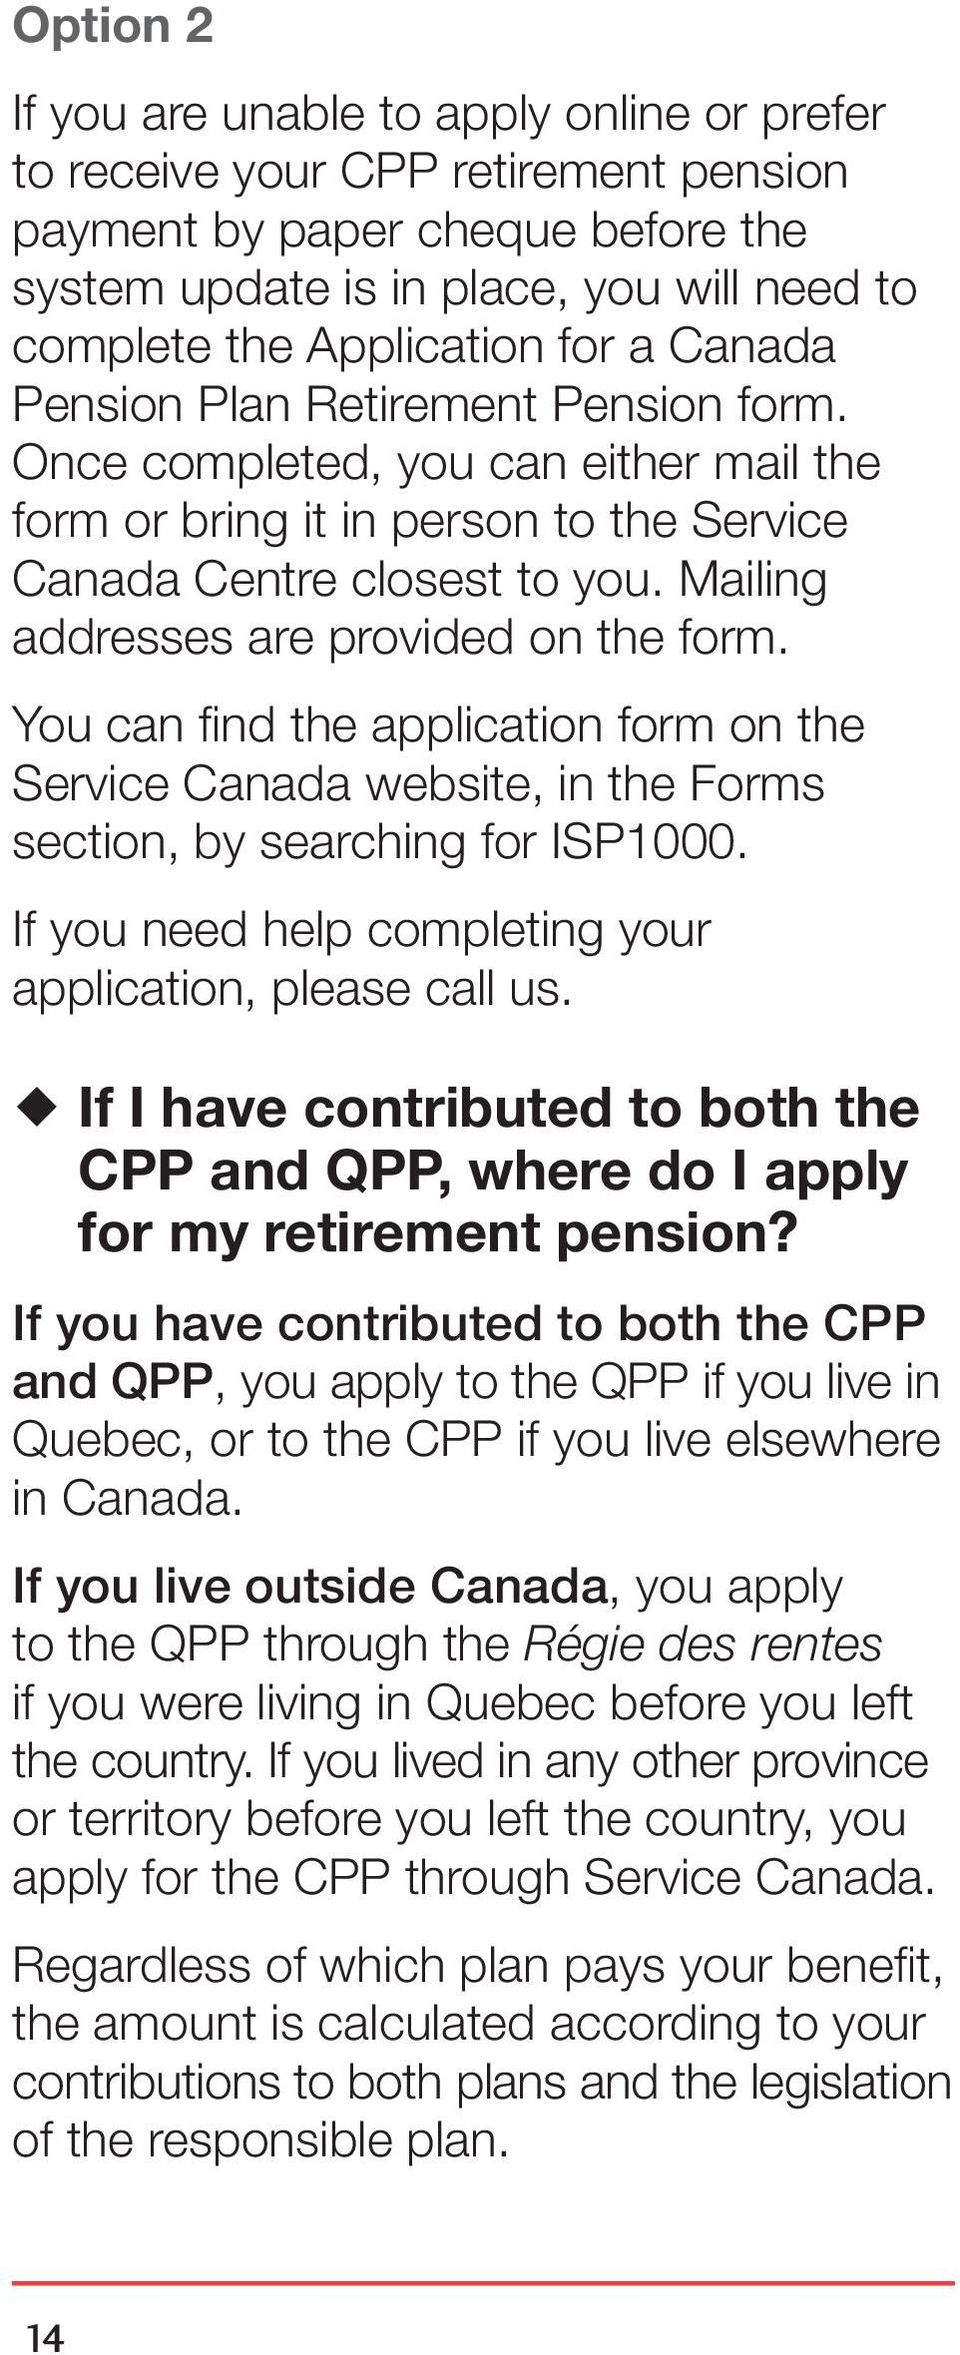 Mailing addresses are provided on the form. You can find the application form on the Service Canada website, in the Forms section, by searching for ISP1000.